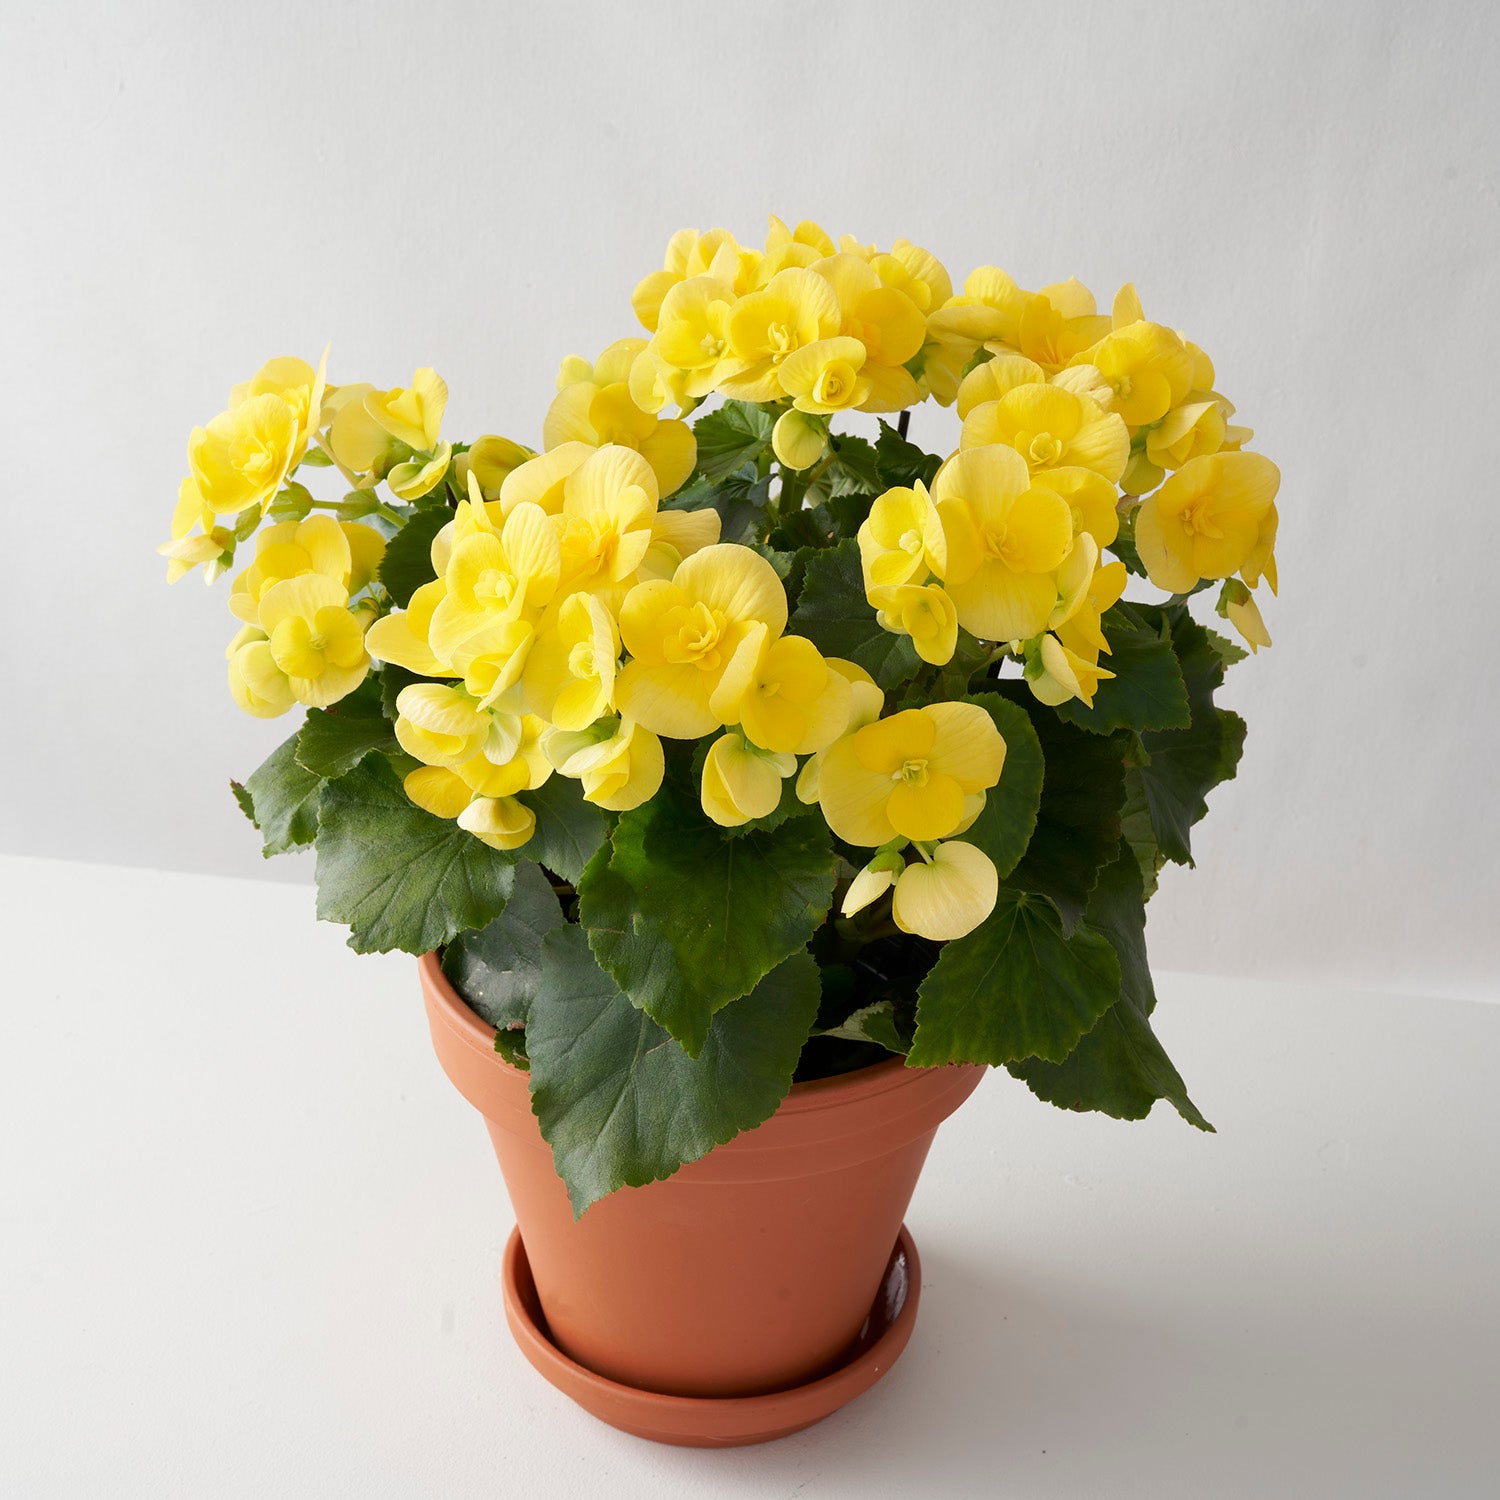 flowering yellow begonia plant in clay pot centered on white background.